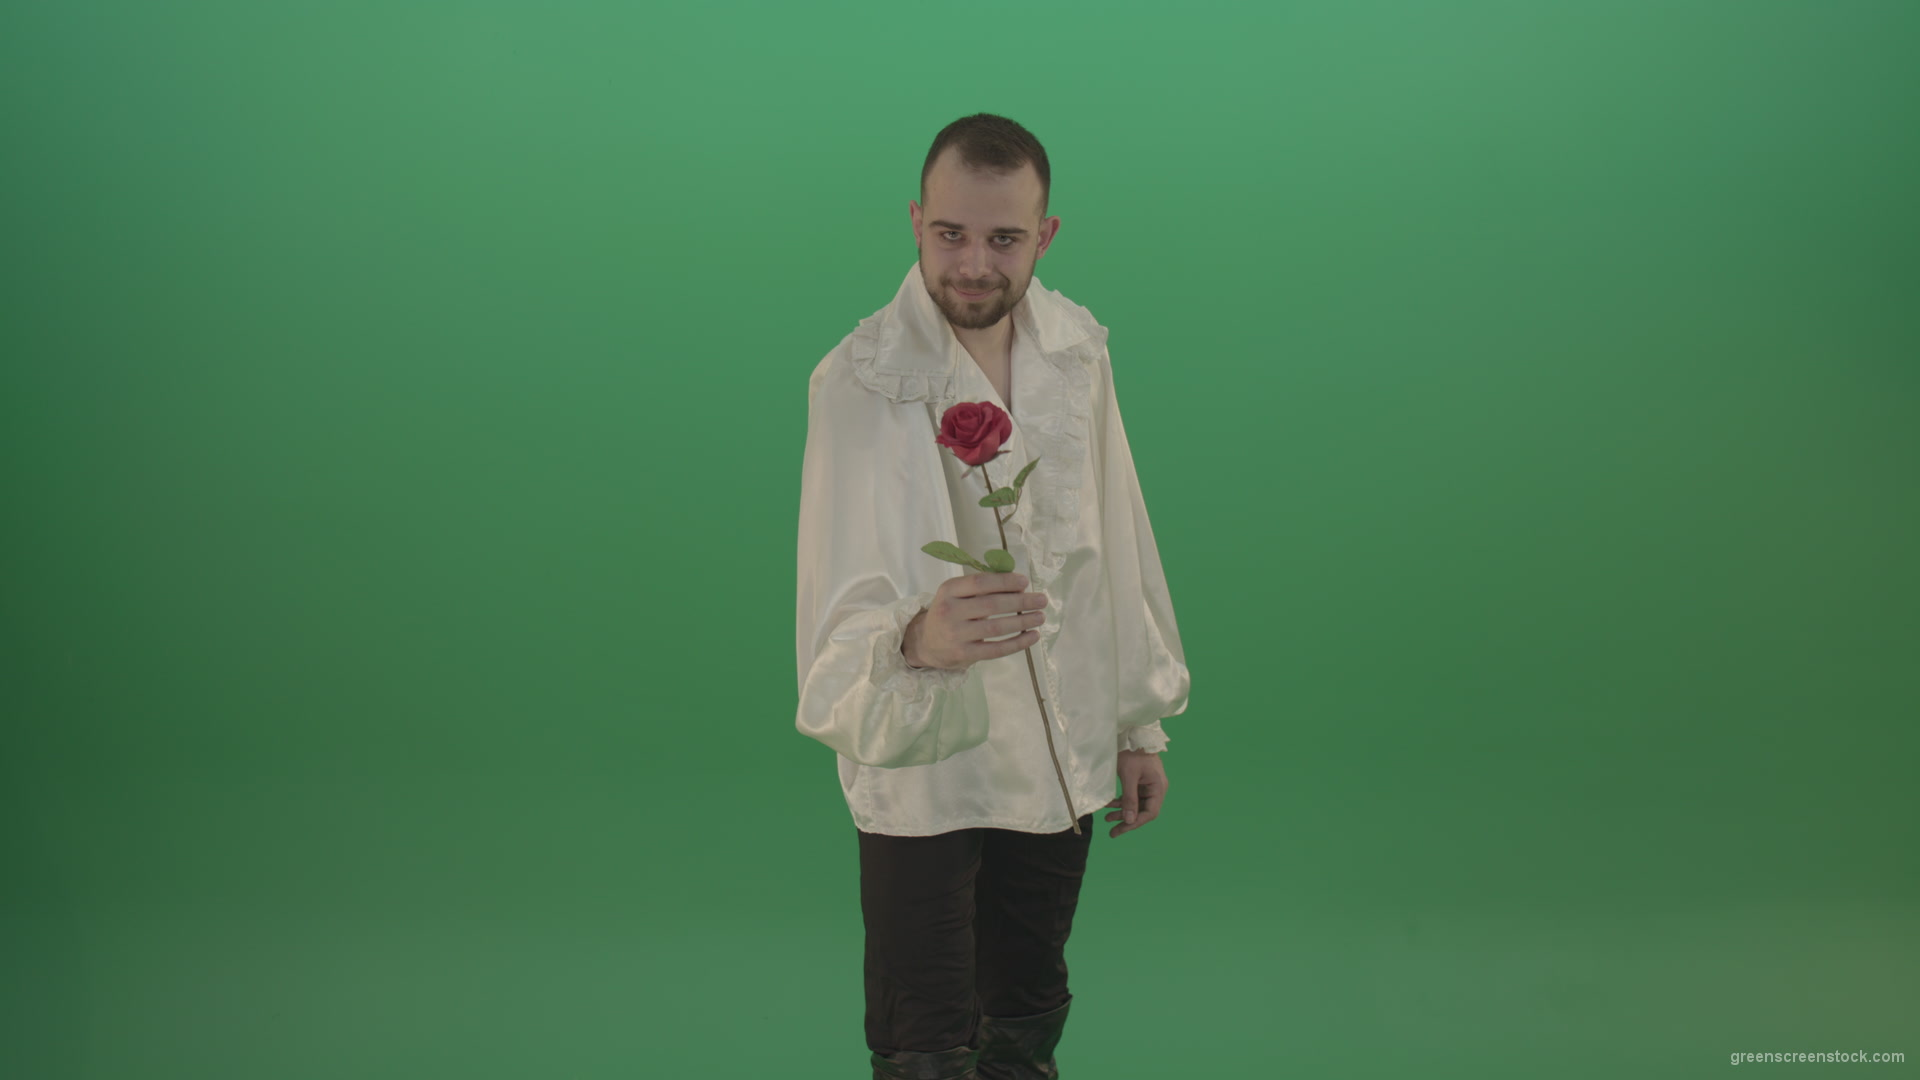 Glancing-at-the-red-flower-the-guy-gives-love-rose-to-camera-isolated-on-green-screen_007 Green Screen Stock